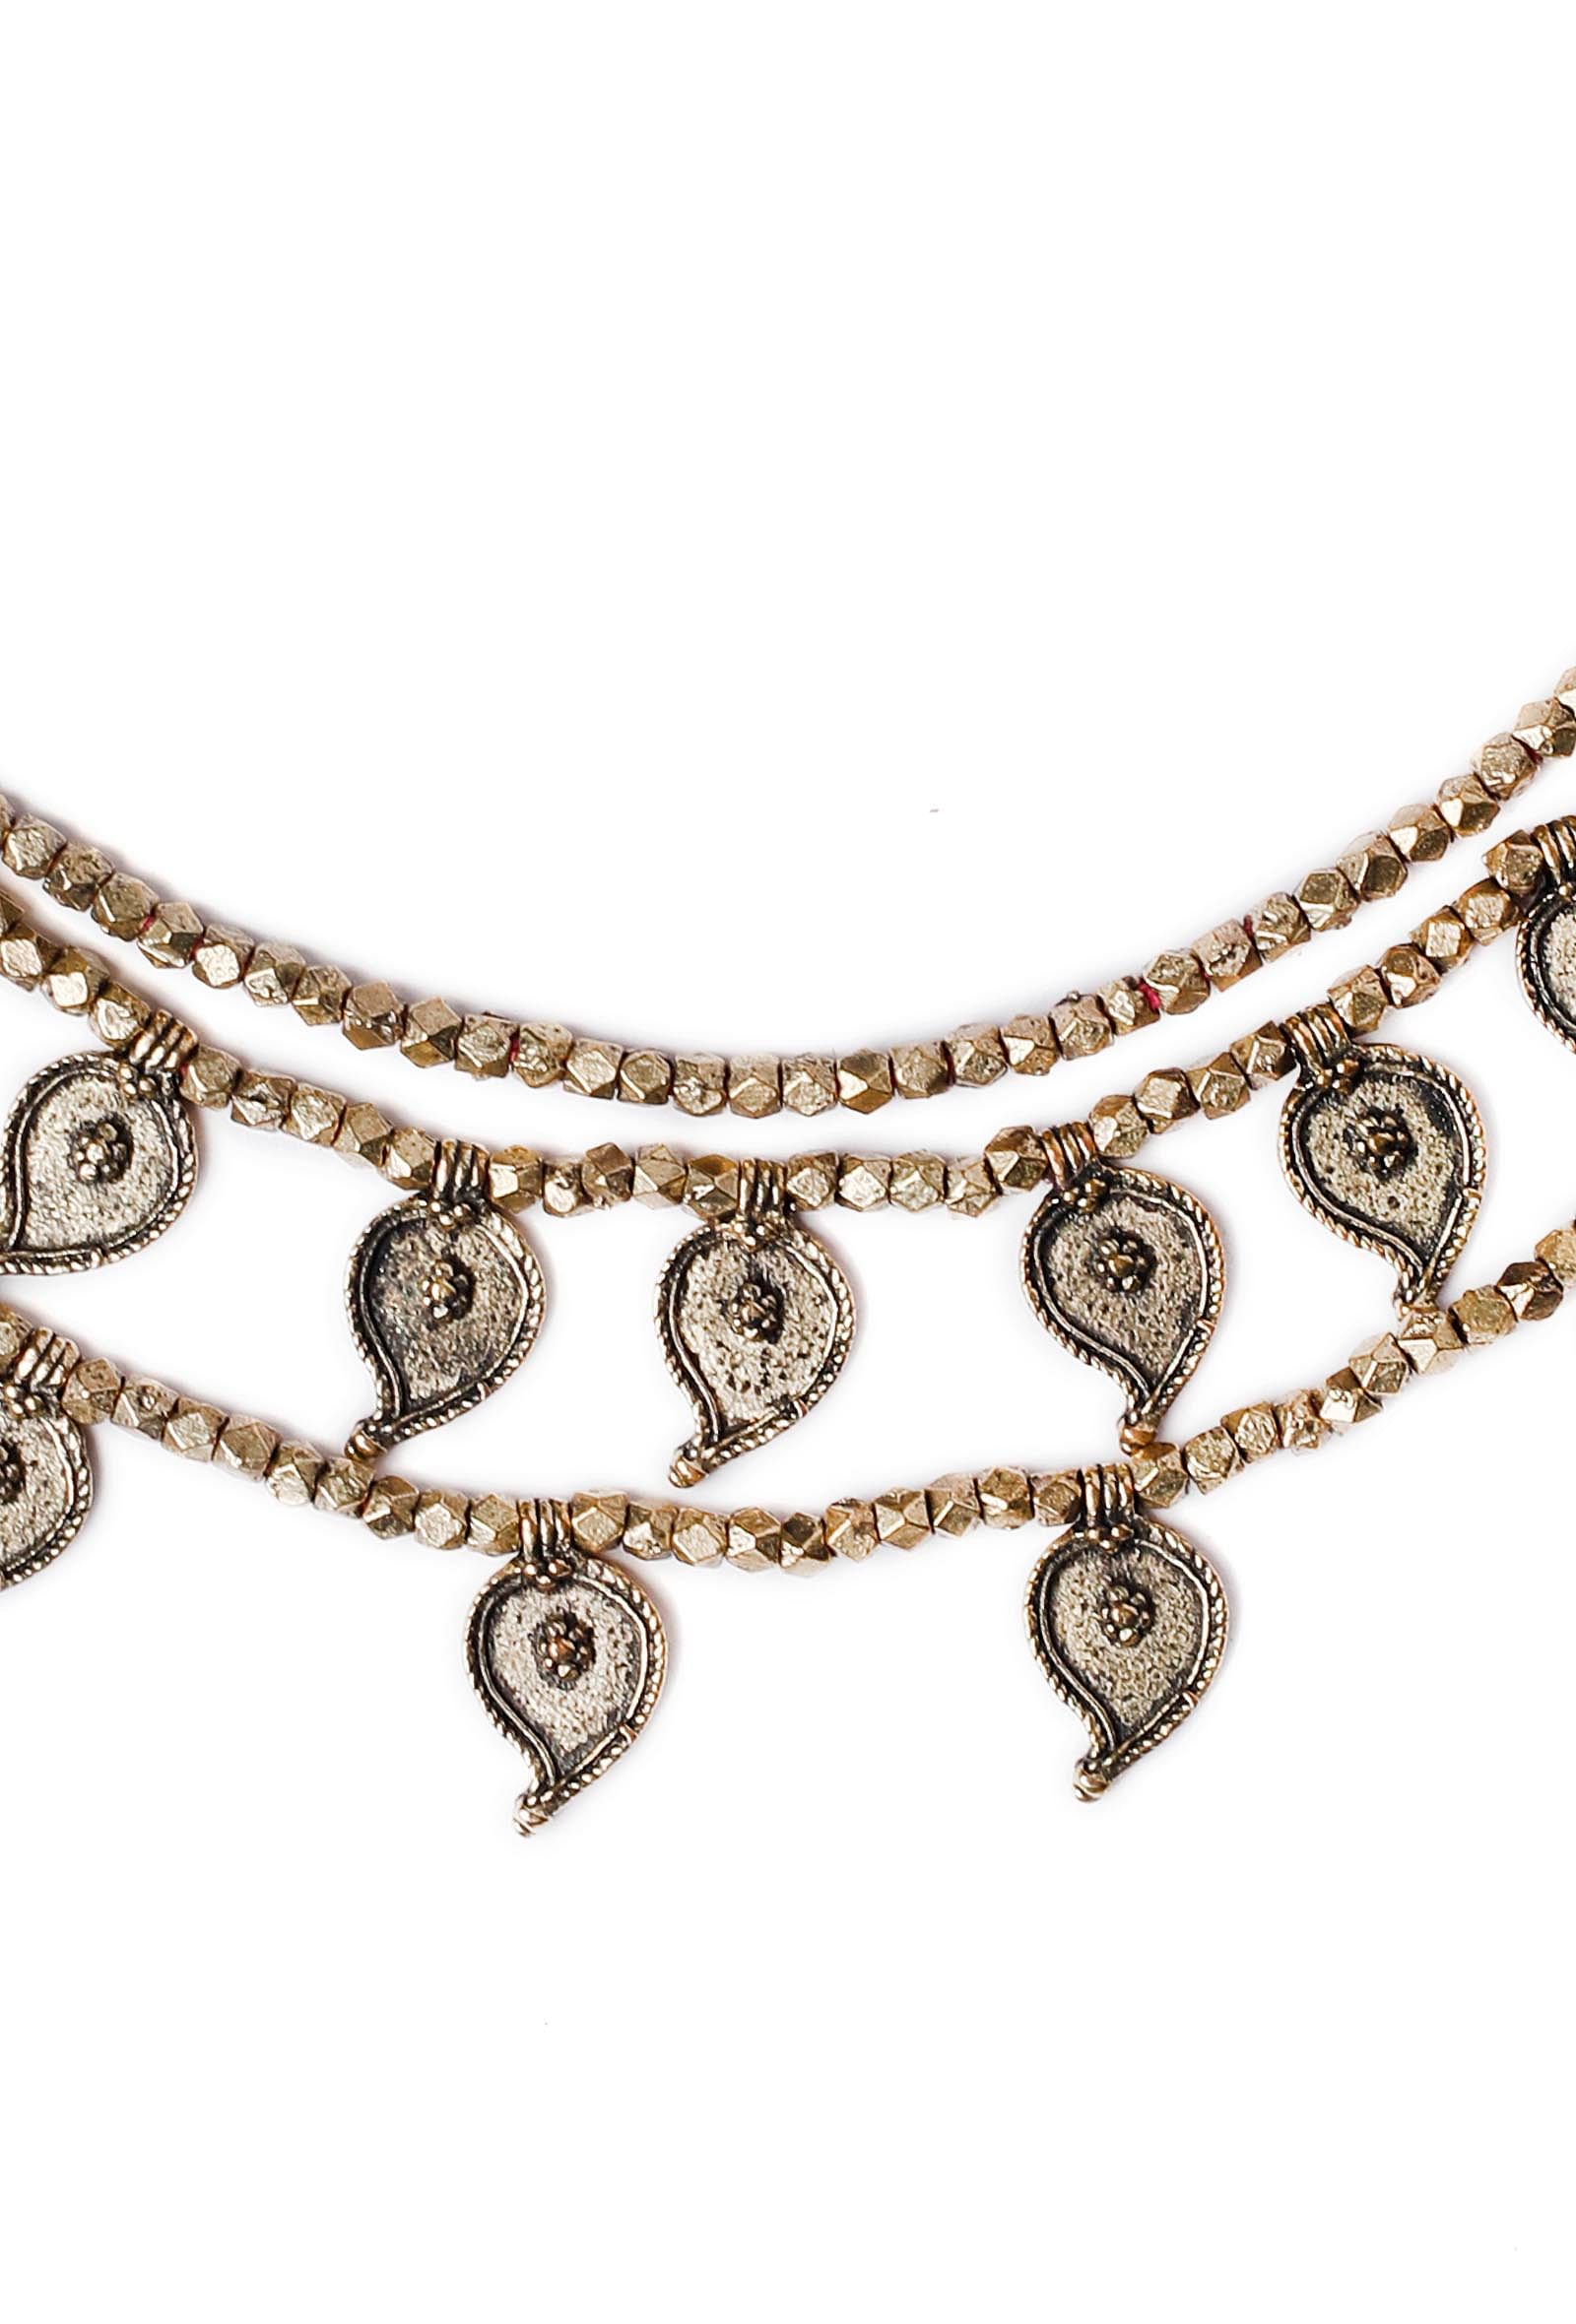 Dhokra-Inspired Triple Strand German Silver Necklace